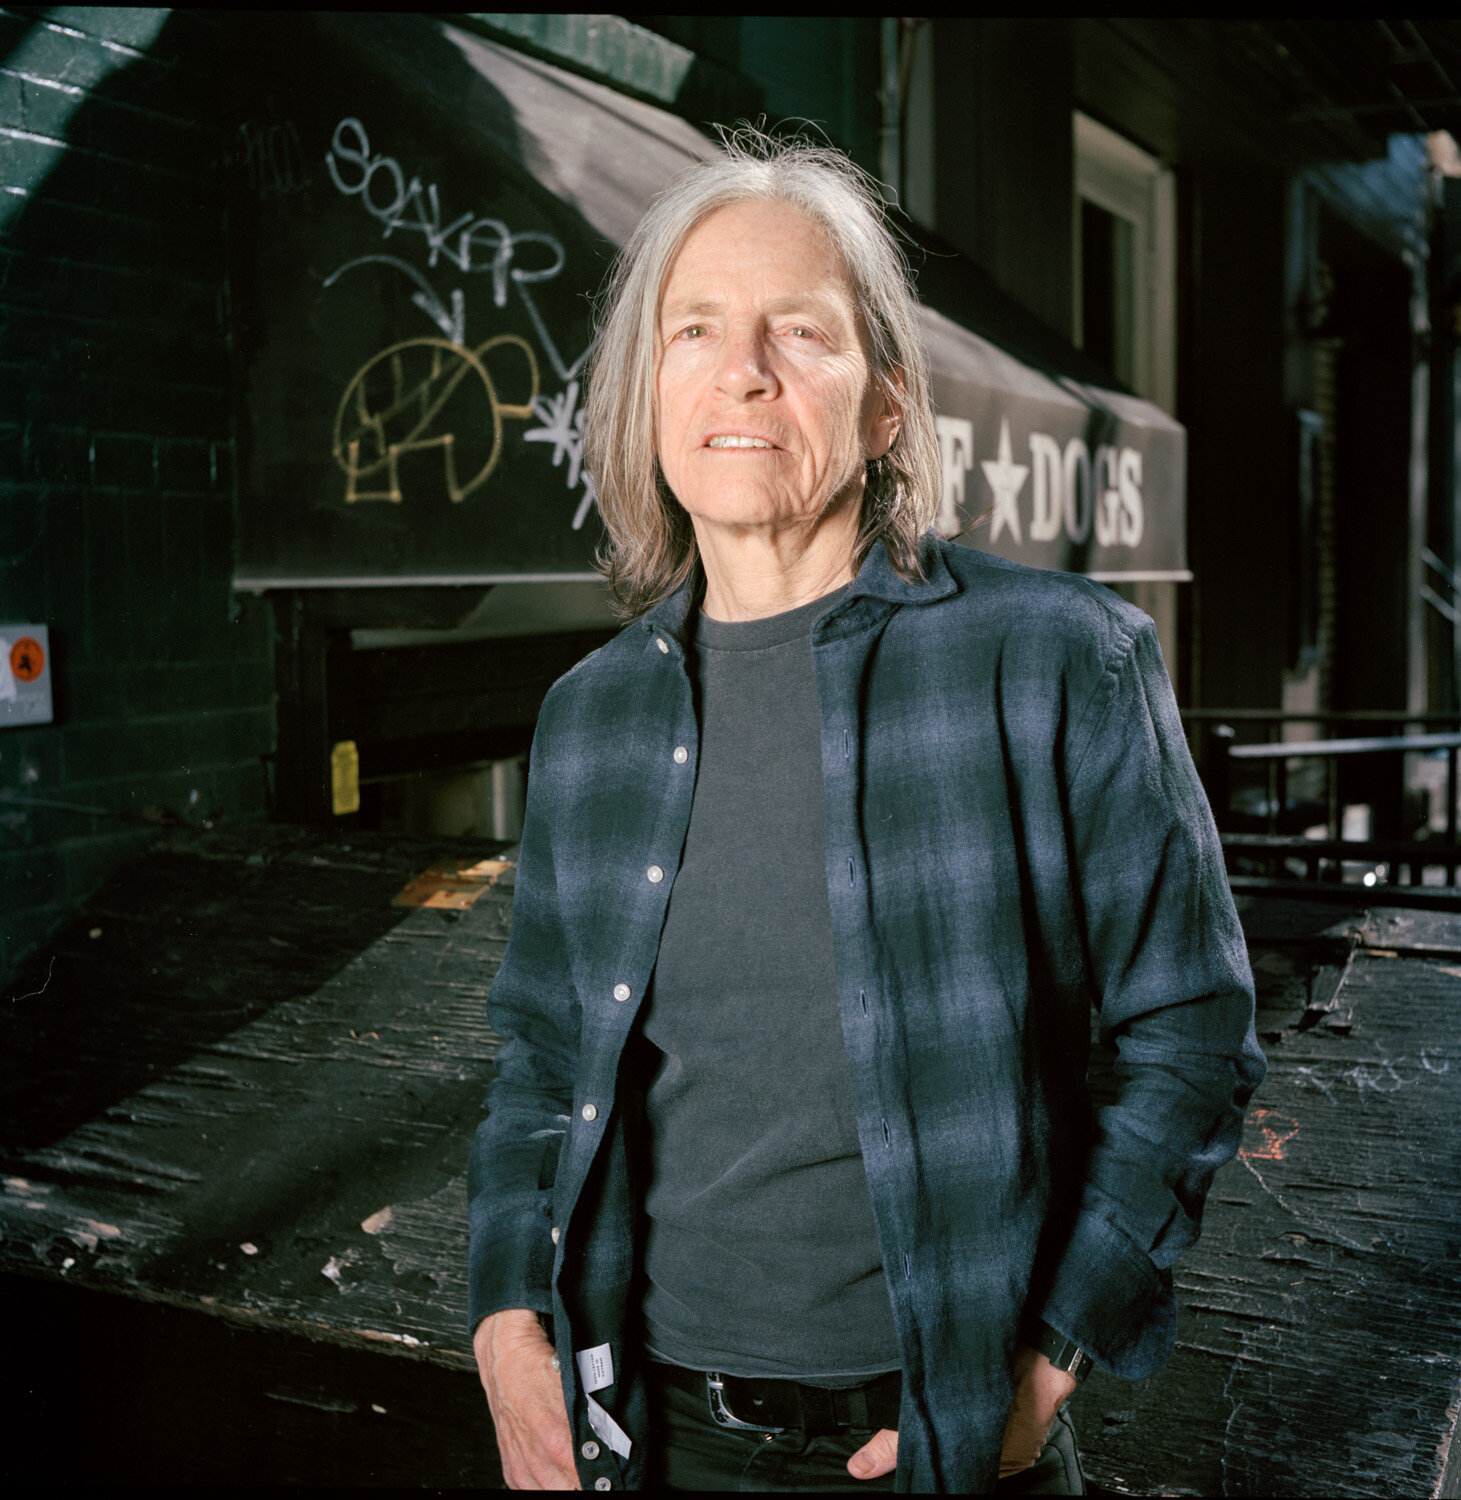  New York City 2019 03 11 Eileen Myles, writer and poet. Shot in New York on assignment for Dagens Nyheter. Shot on a Rolliflex and Kodak porta 160. 